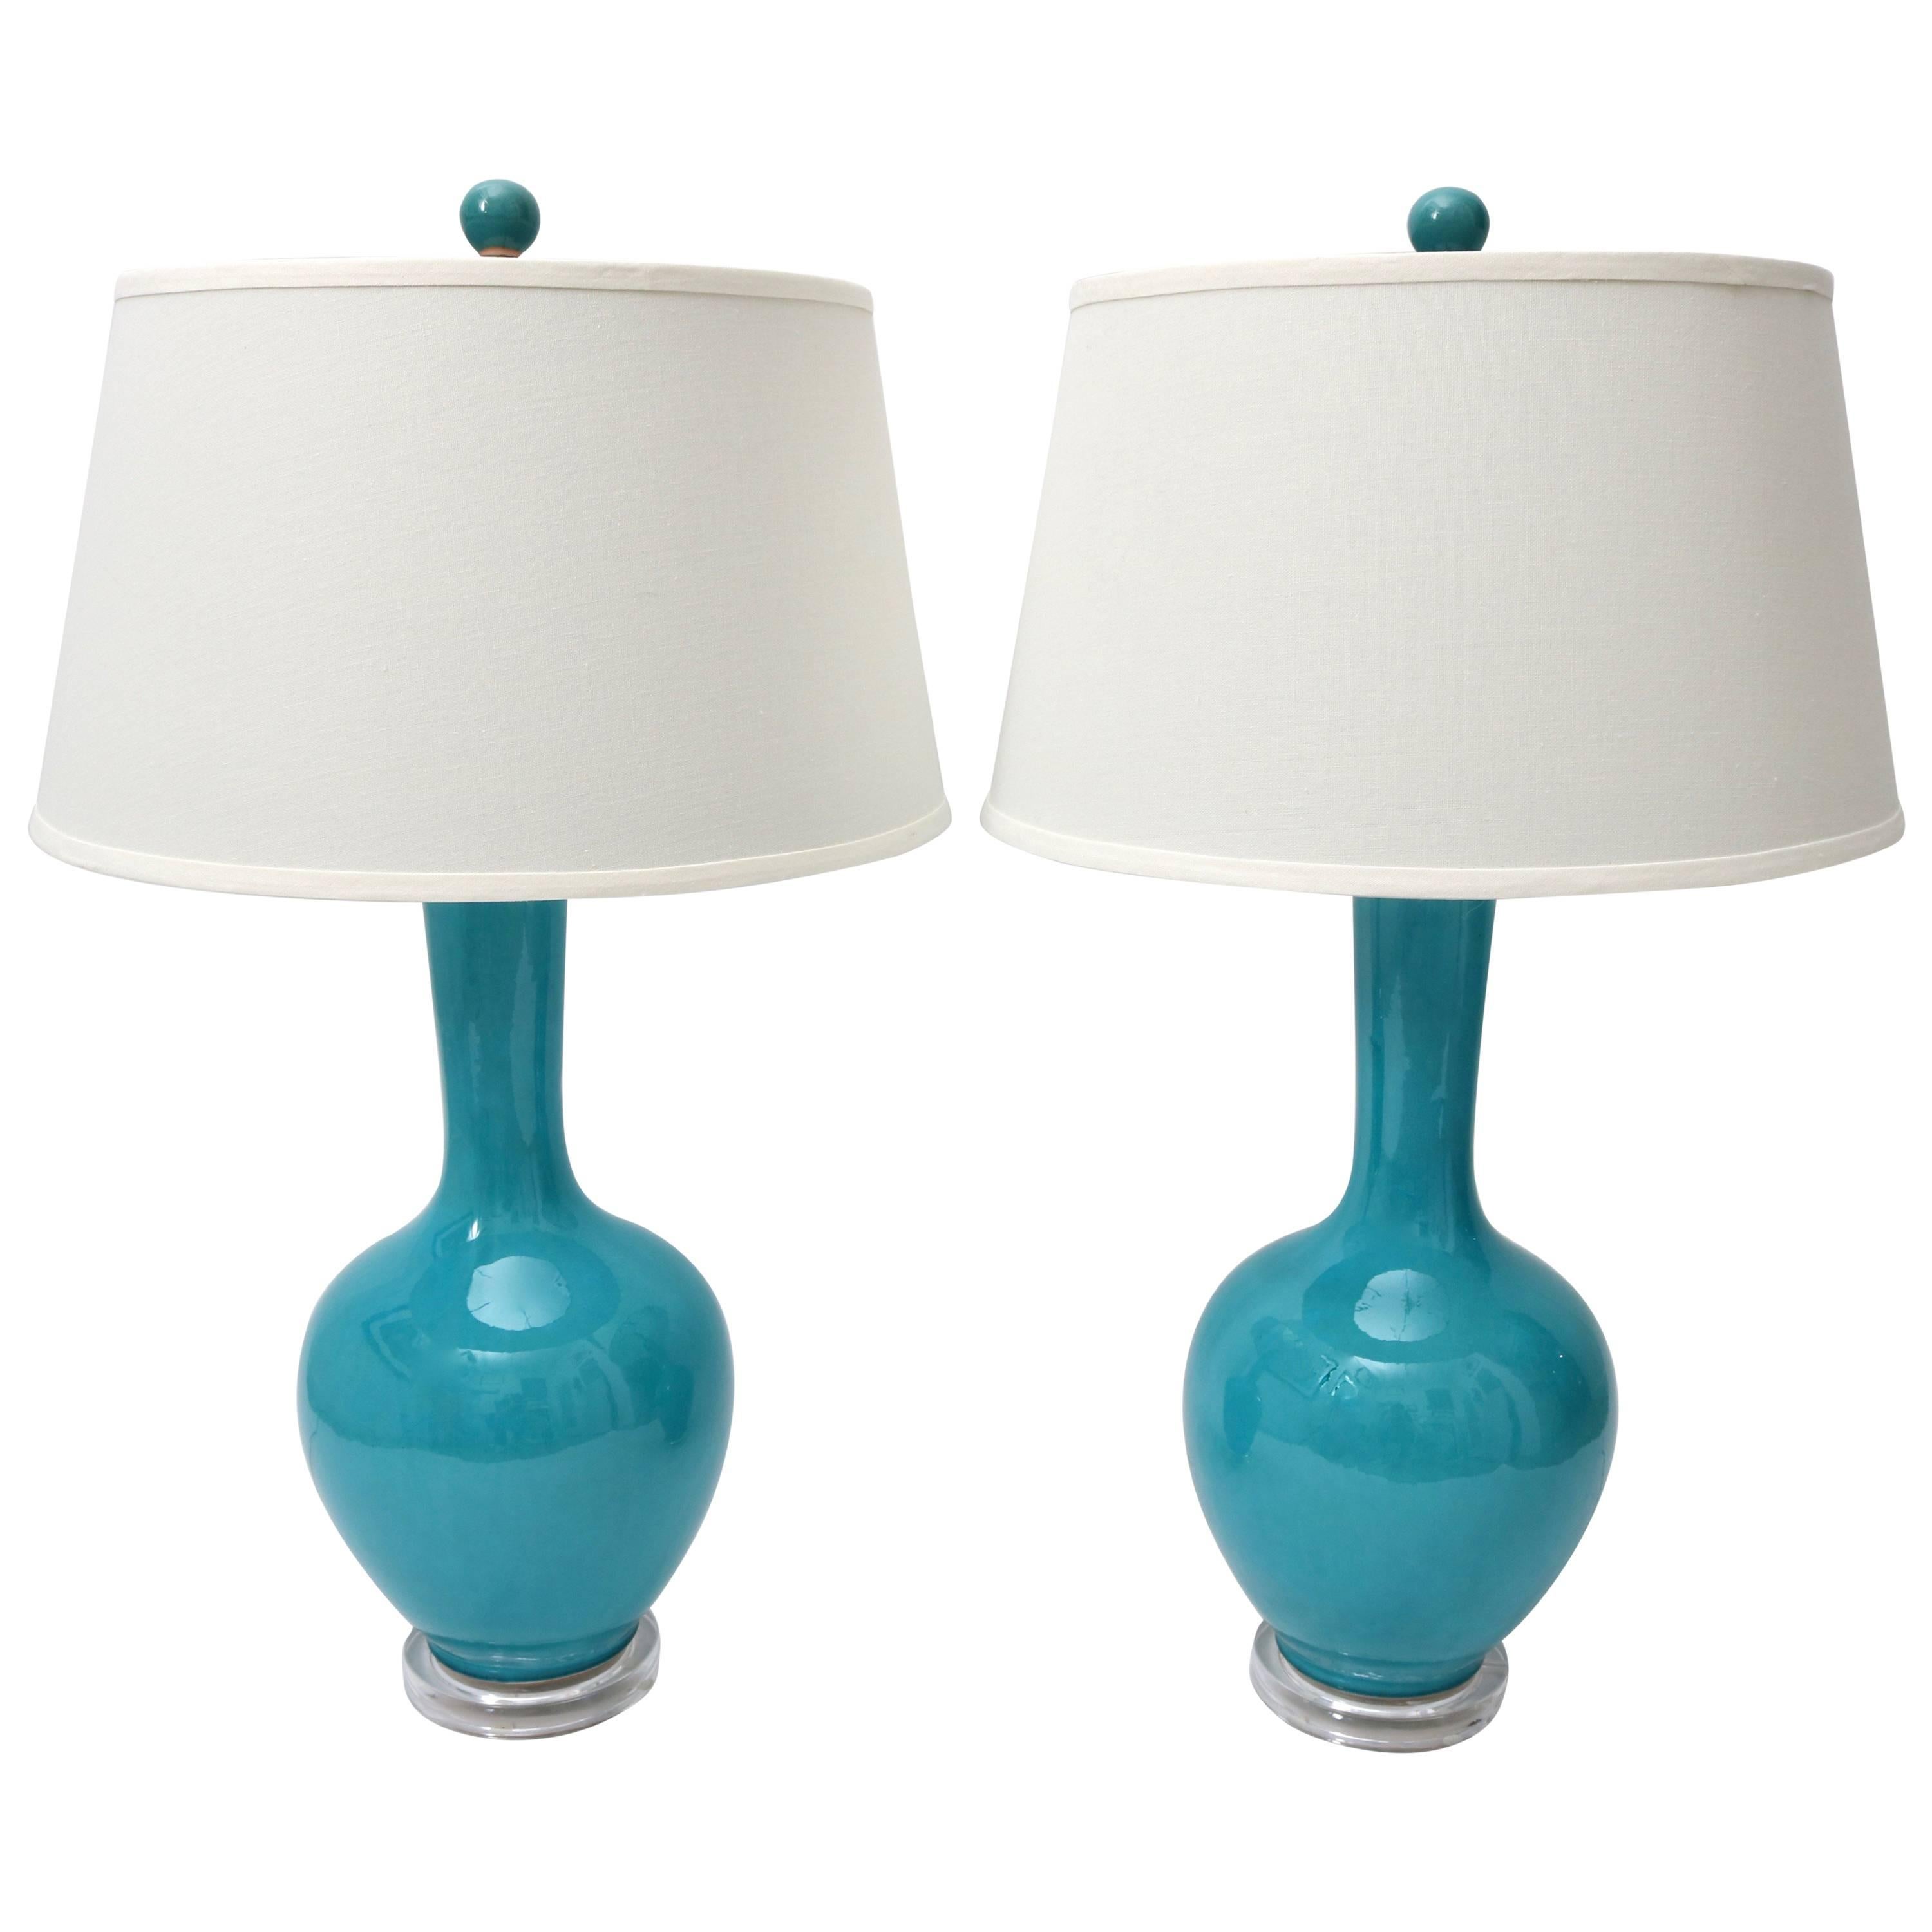 Pair of Turquoise Colored Vase-Form Table Lamps with Lucite Bases